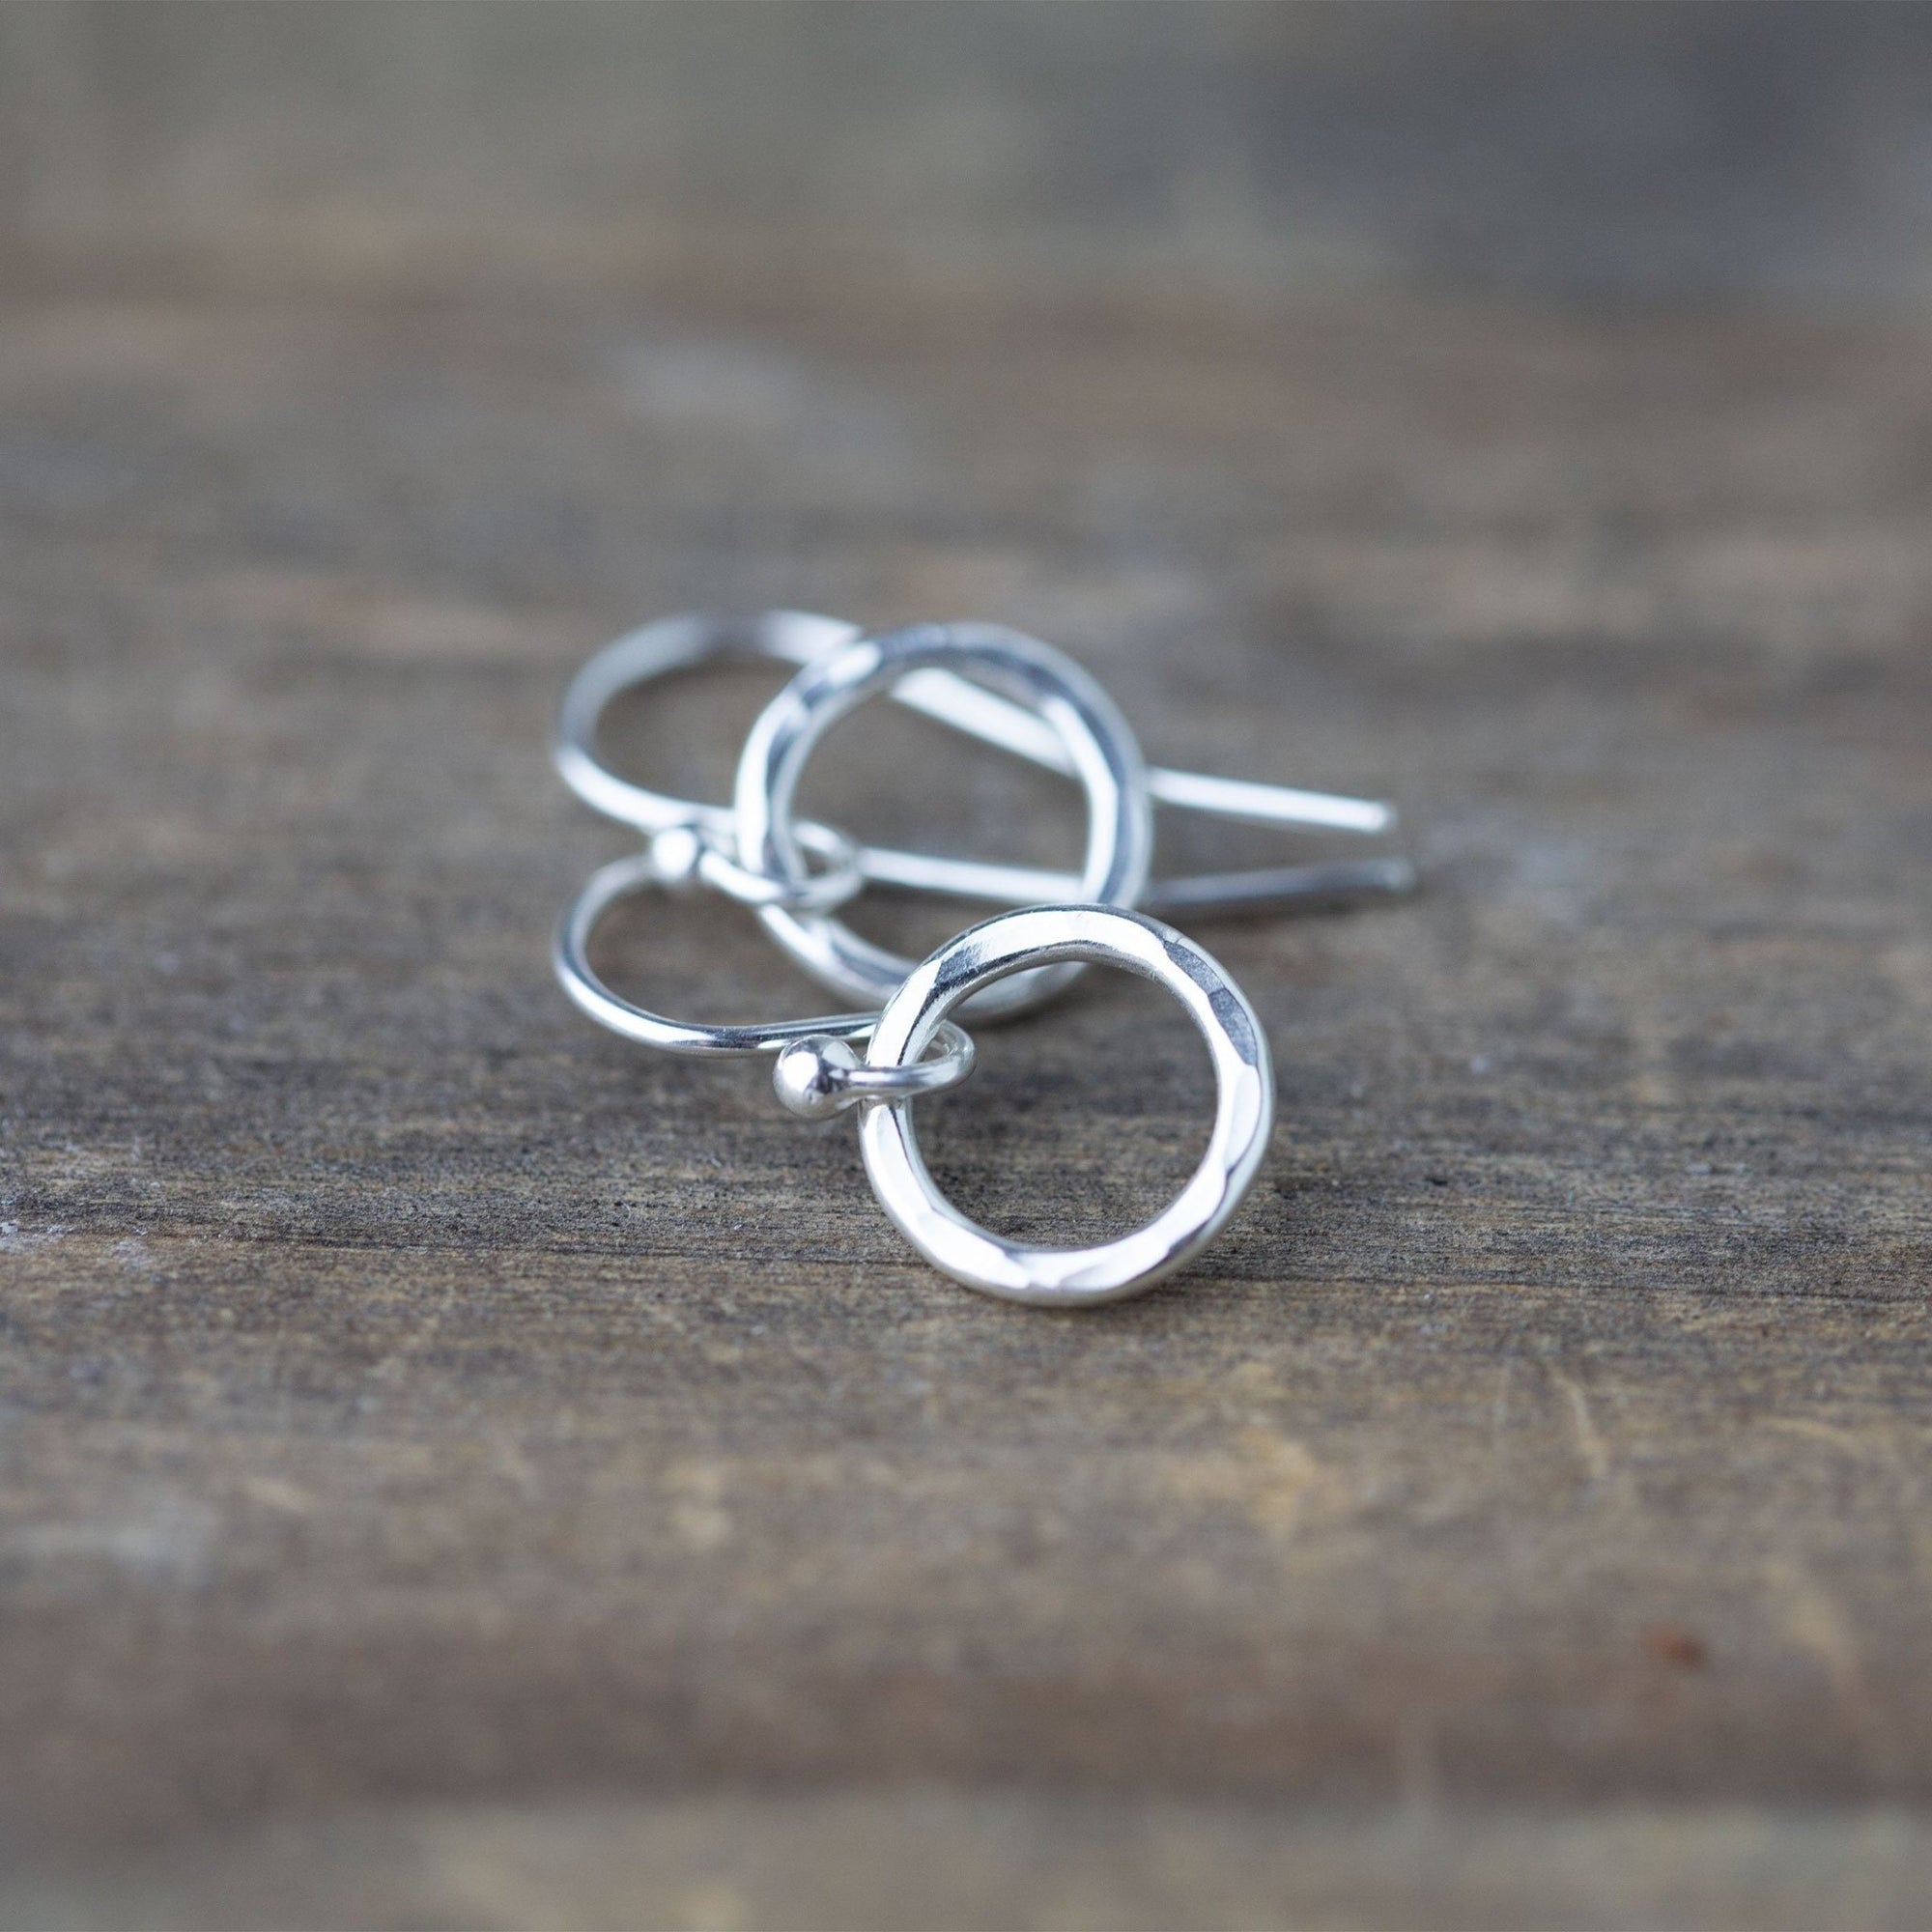 Small Hammered Circle Earrings - Handmade Jewelry by Burnish